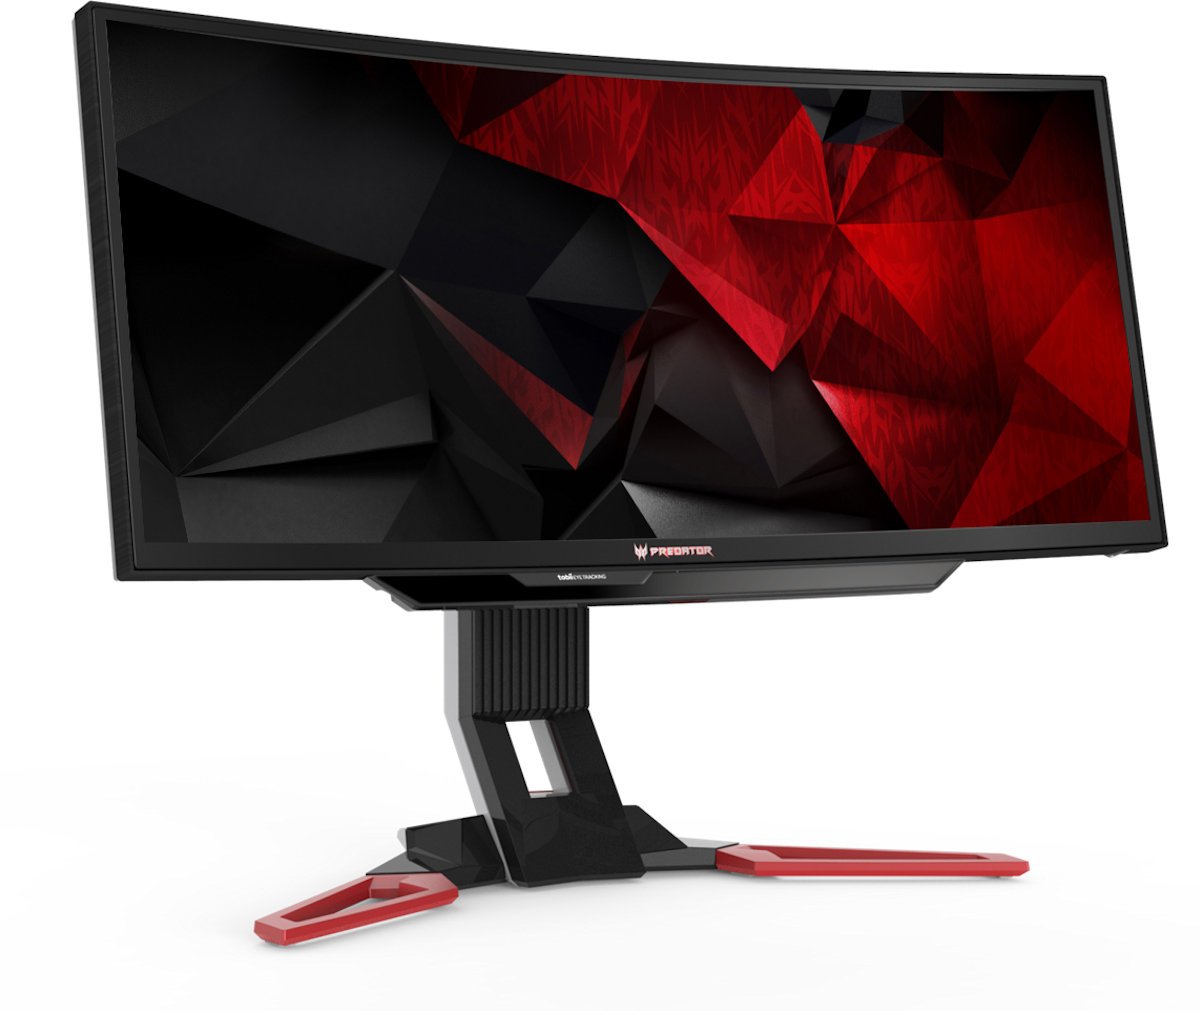 Acer announces Predator Z301CT gaming monitor with built-in eye tracking